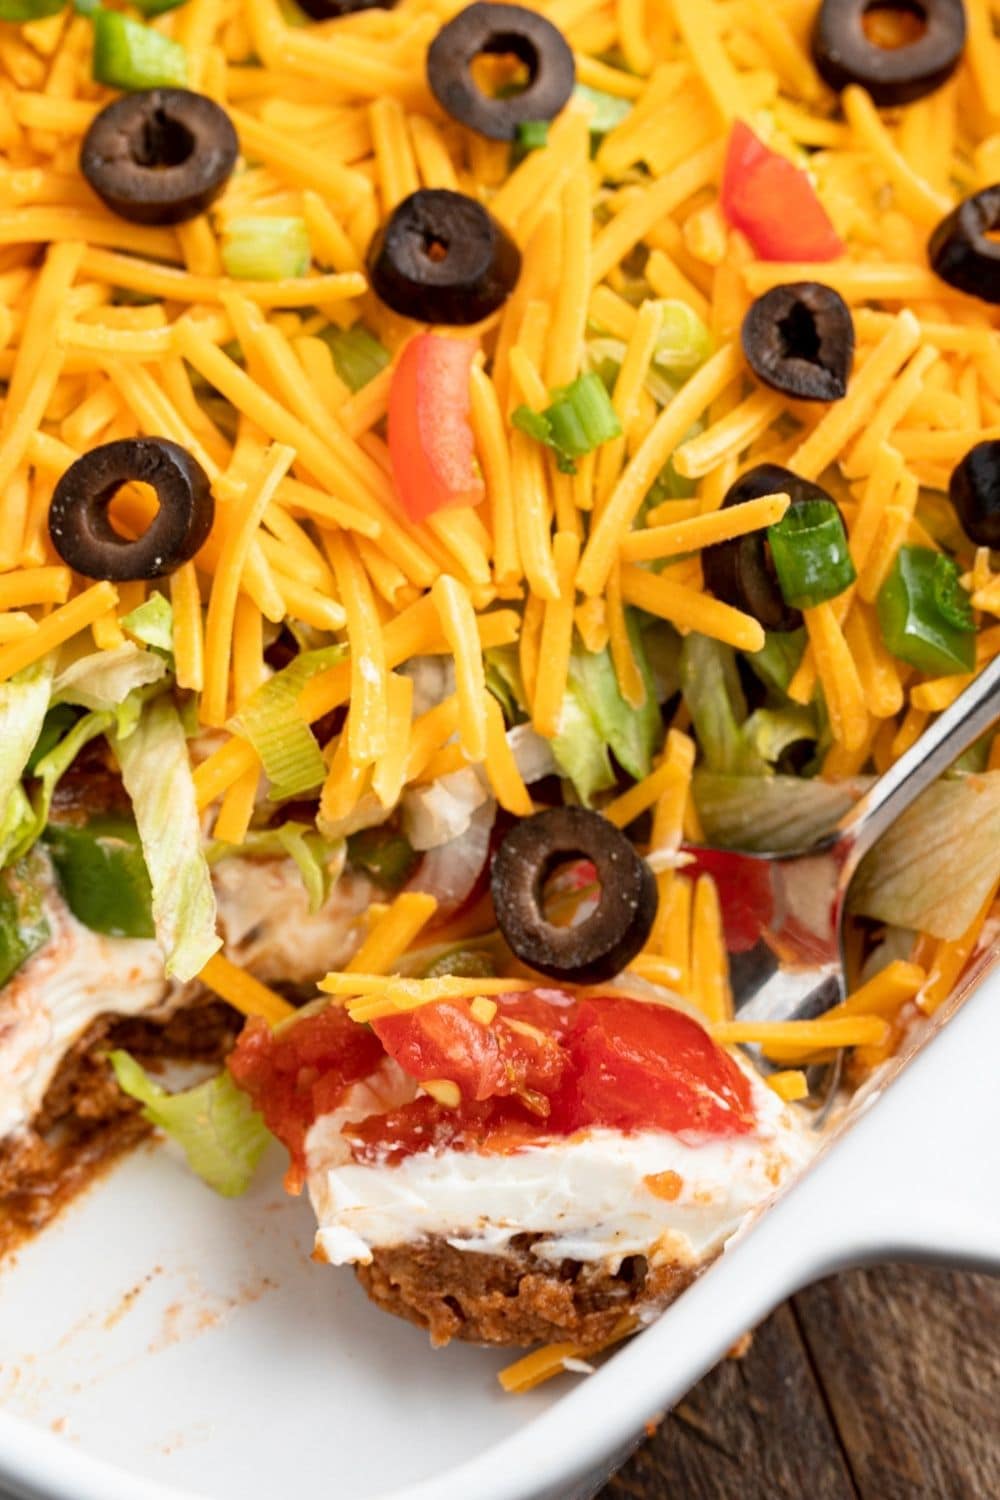 Homemade Seven Layer Taco Dip with Black Olives, Tomatoes and Onions